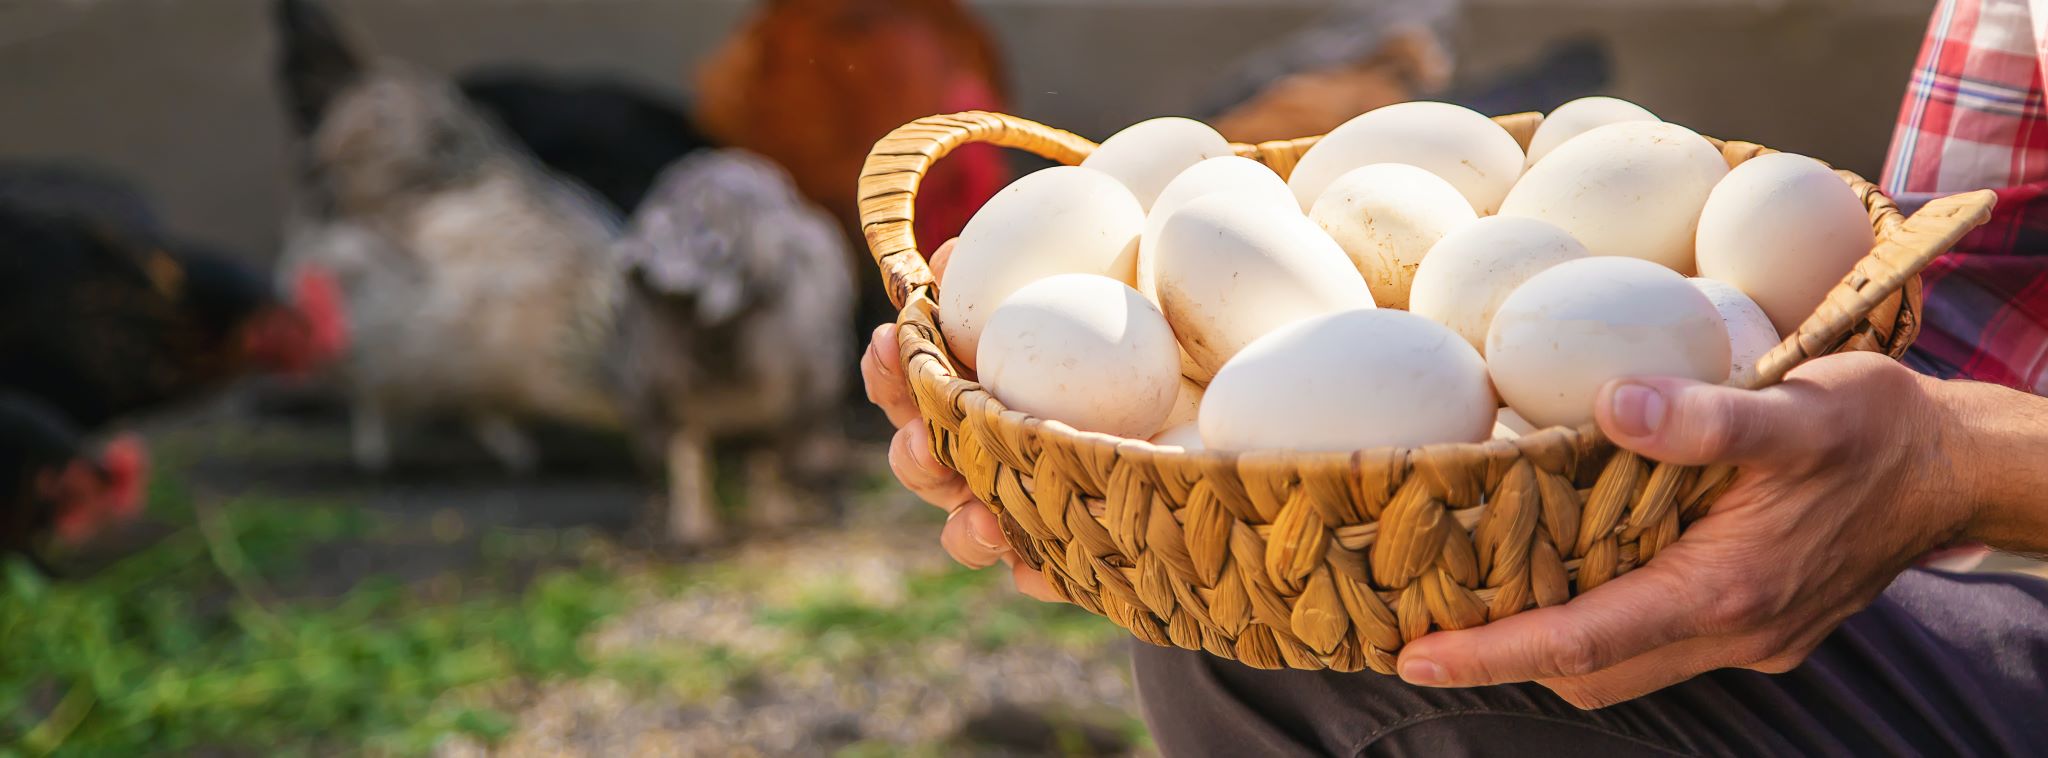 Hands holding large basket of white eggs with chickens in the background.